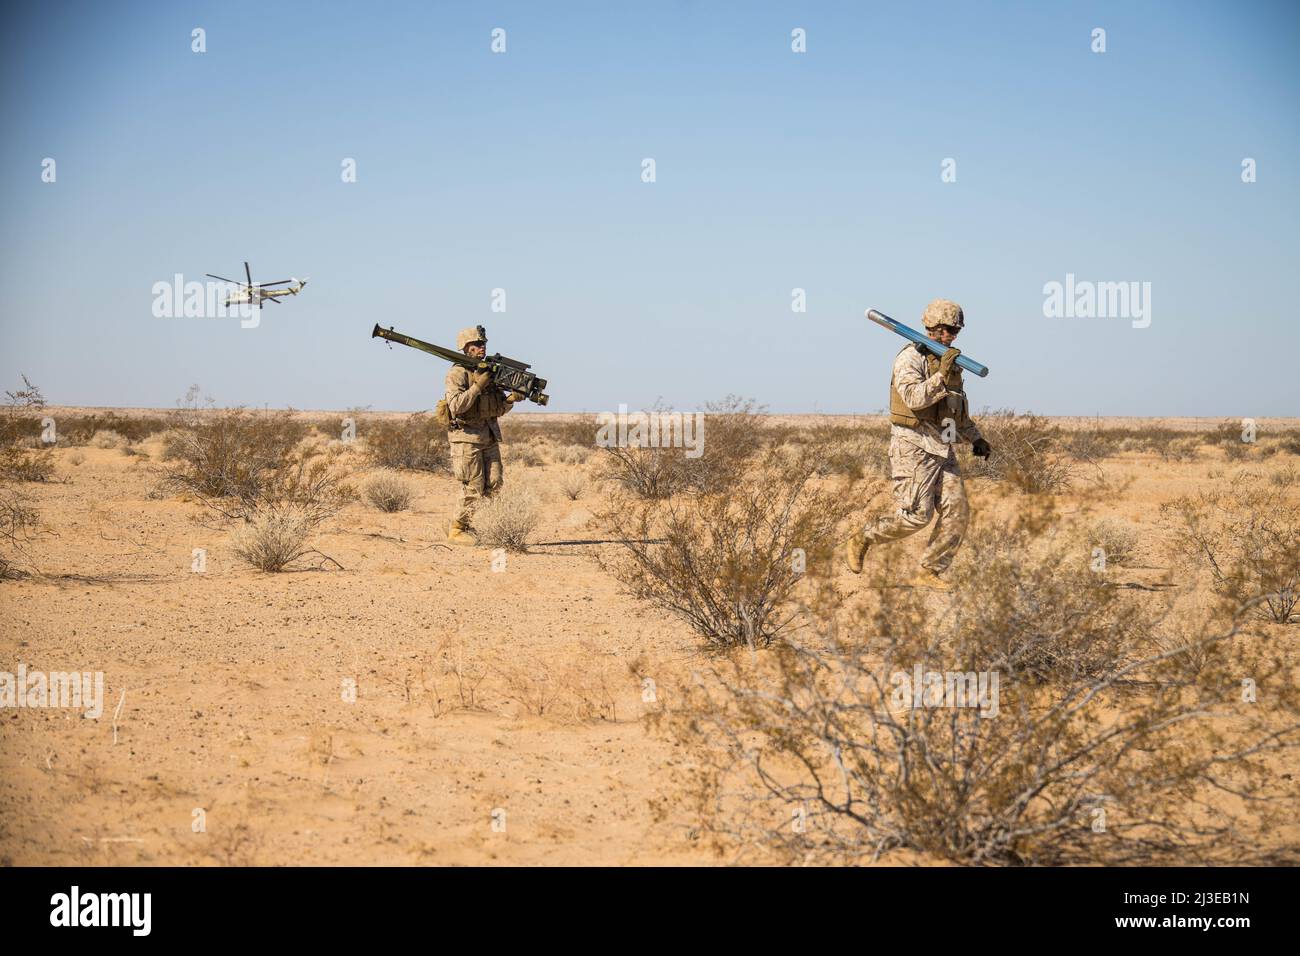 U.S. Marines with Ground Base Air Defense, Marine Aviation Weapons and Tactics Squadron One (MAWTS-1), move to a firing position, during Weapons and Tactics Instructor (WTI) course 2-22, at Auxiliary Airfield II, near Yuma, Arizona, April 5, 2022. WTI is a seven-week training event hosted by MAWTS-1, providing standardized advanced tactical training and certification of unit instructor qualifications to support Marine aviation training and readiness, and assists in developing and employing aviation weapons and tactics. (U.S. Marine Corps photo by Lance Cpl. Dean Gurule) Stock Photo